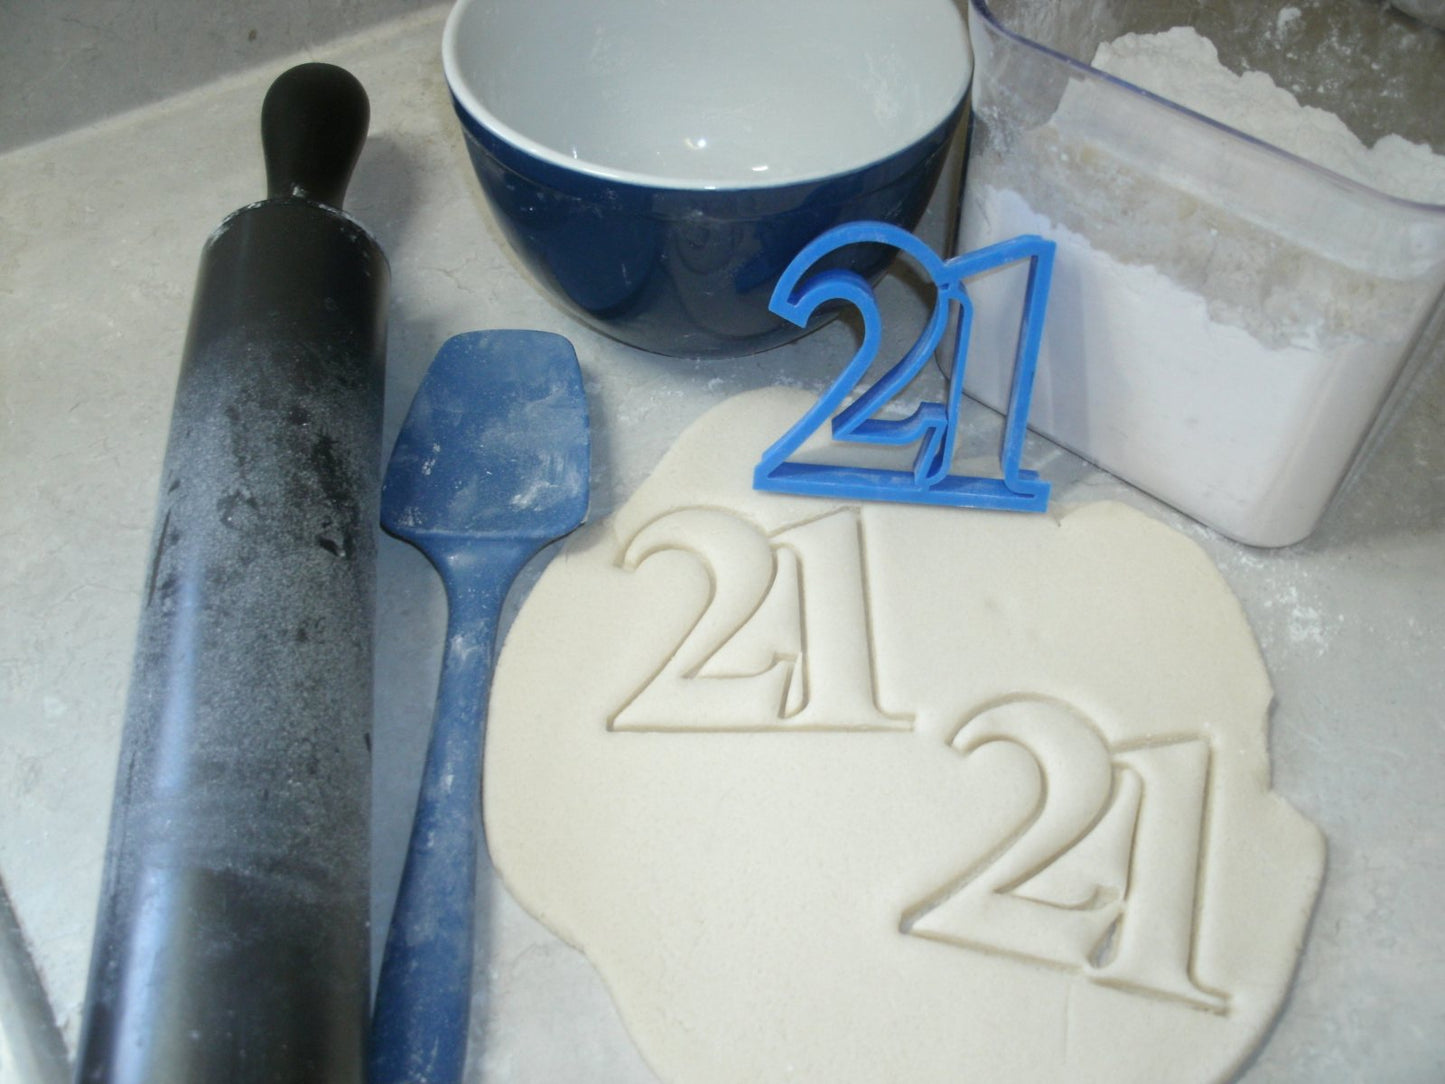 21st Birthday Number 21 Wine Glass Bottle Cap Set of 4 Cookie Cutters USA PR1037